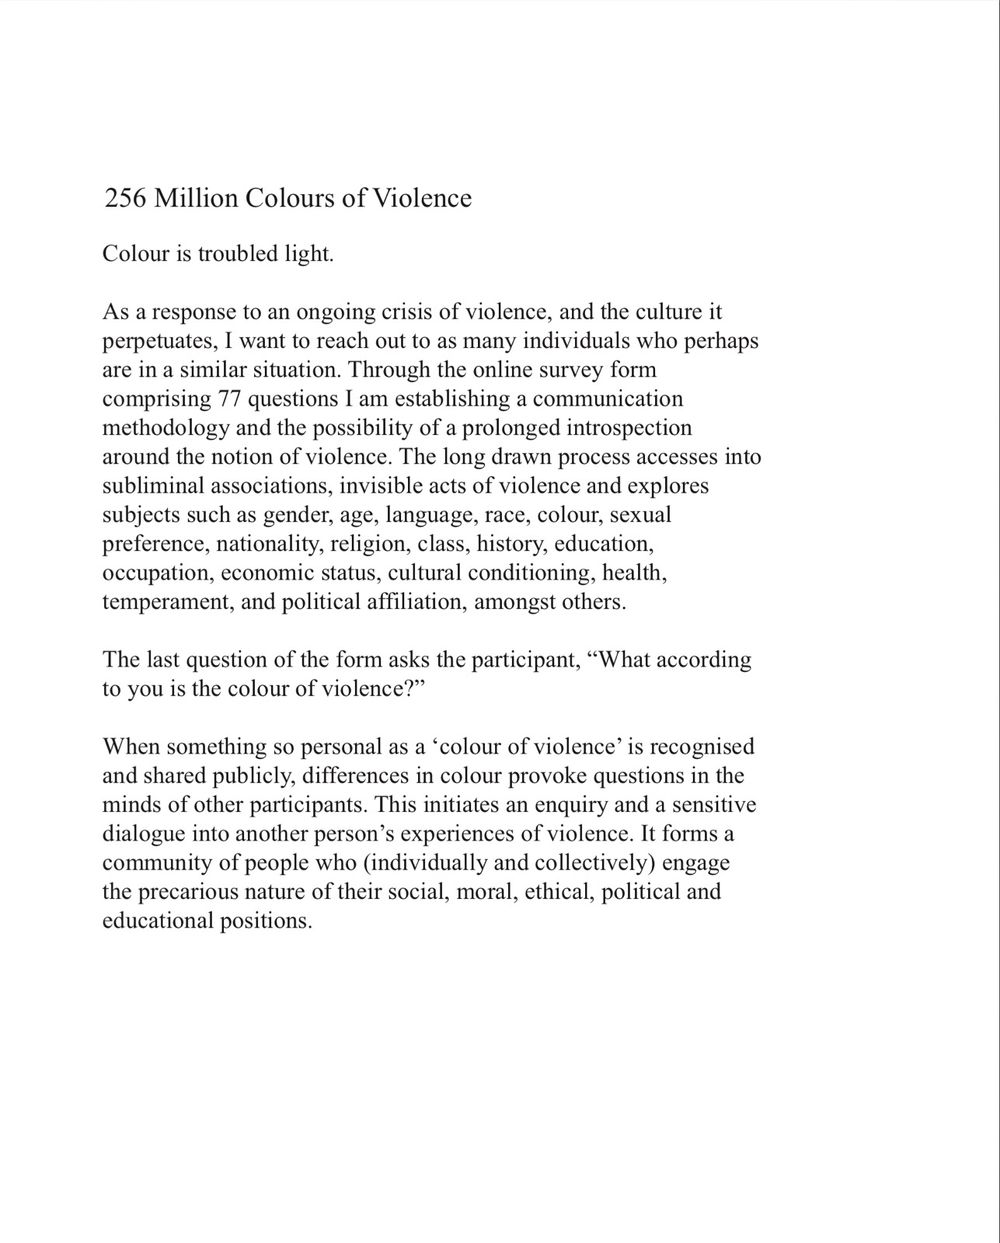 Colours of Violence - AROOP III - Totems and Taboos, (ed.) Nancy Adajania, published by Raza Foundation, New Delhi, 2018